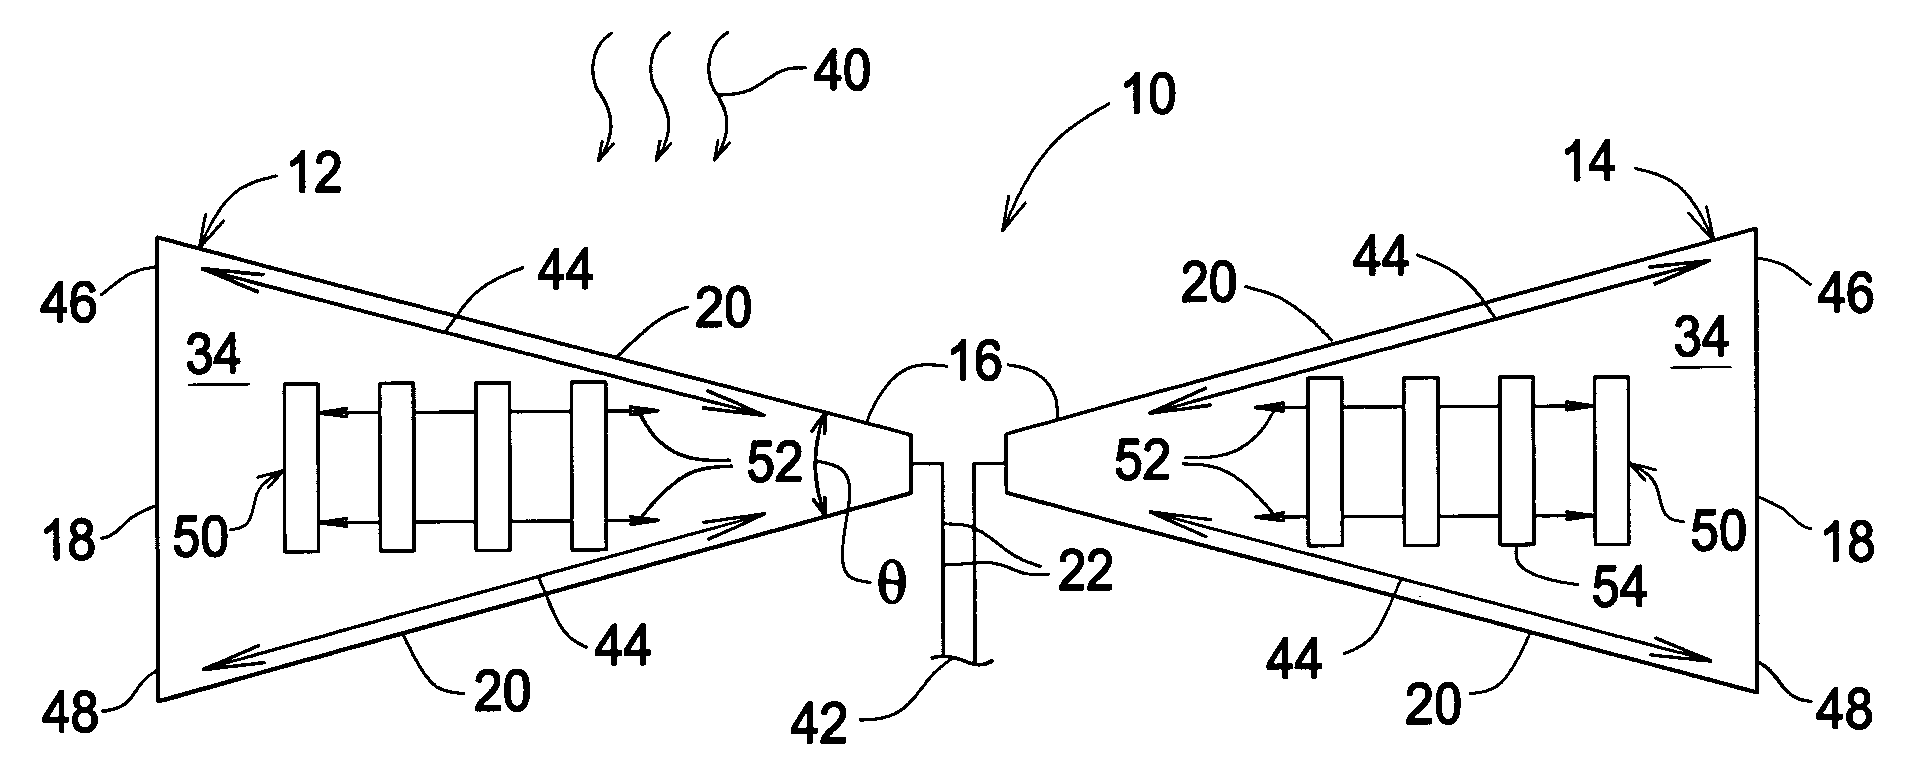 Planar antenna with supplemental antenna current configuration arranged between dominant current paths